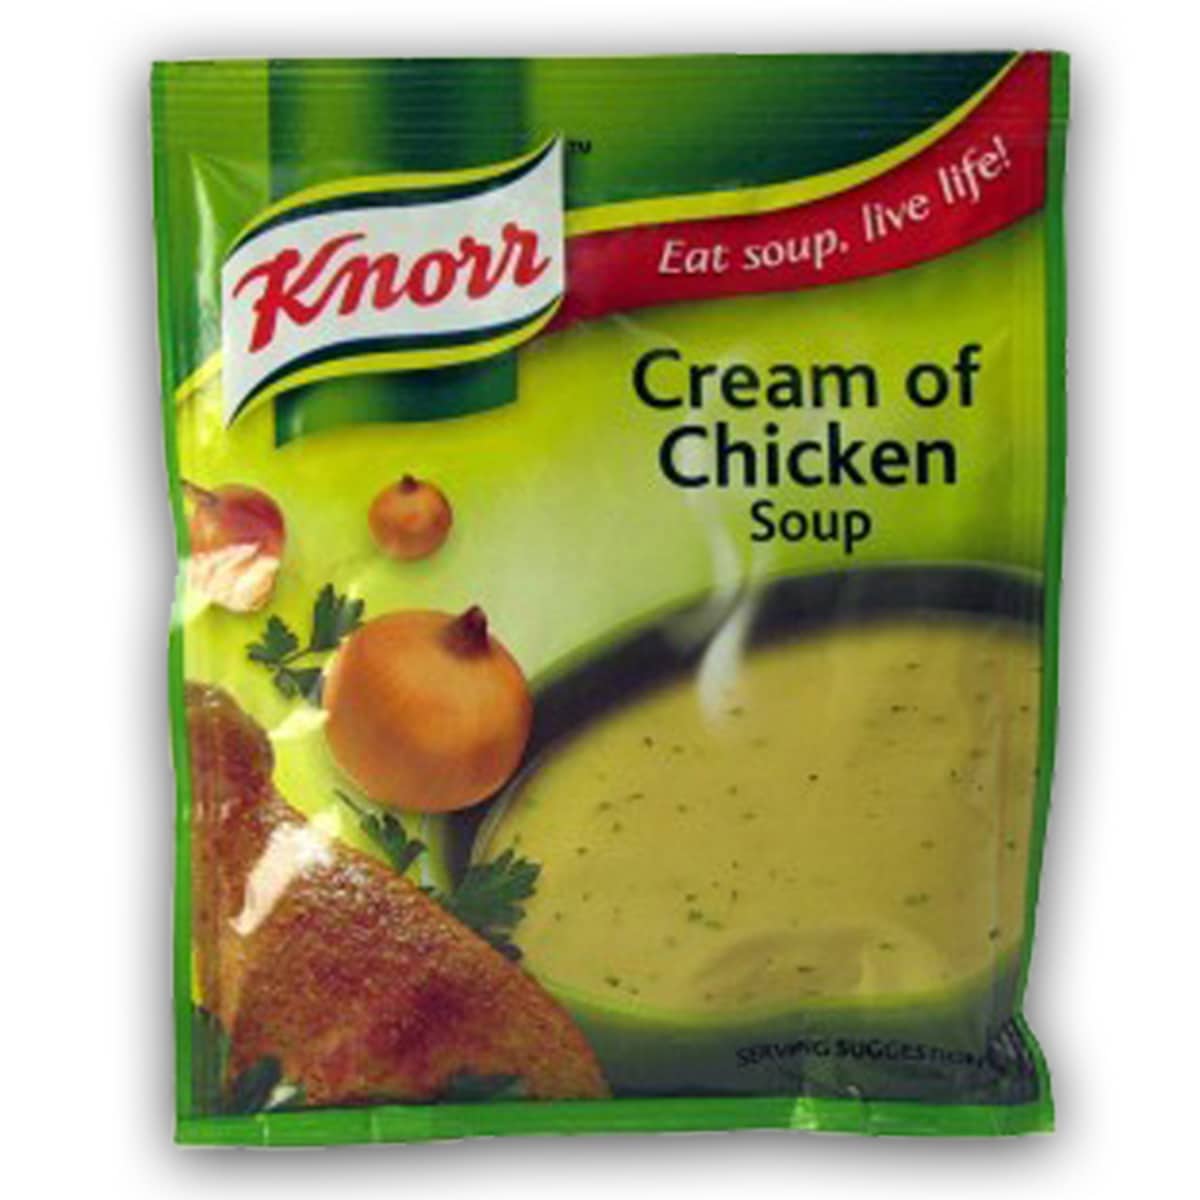 Buy Knorr Cream of Chicken Soup - 45 gm